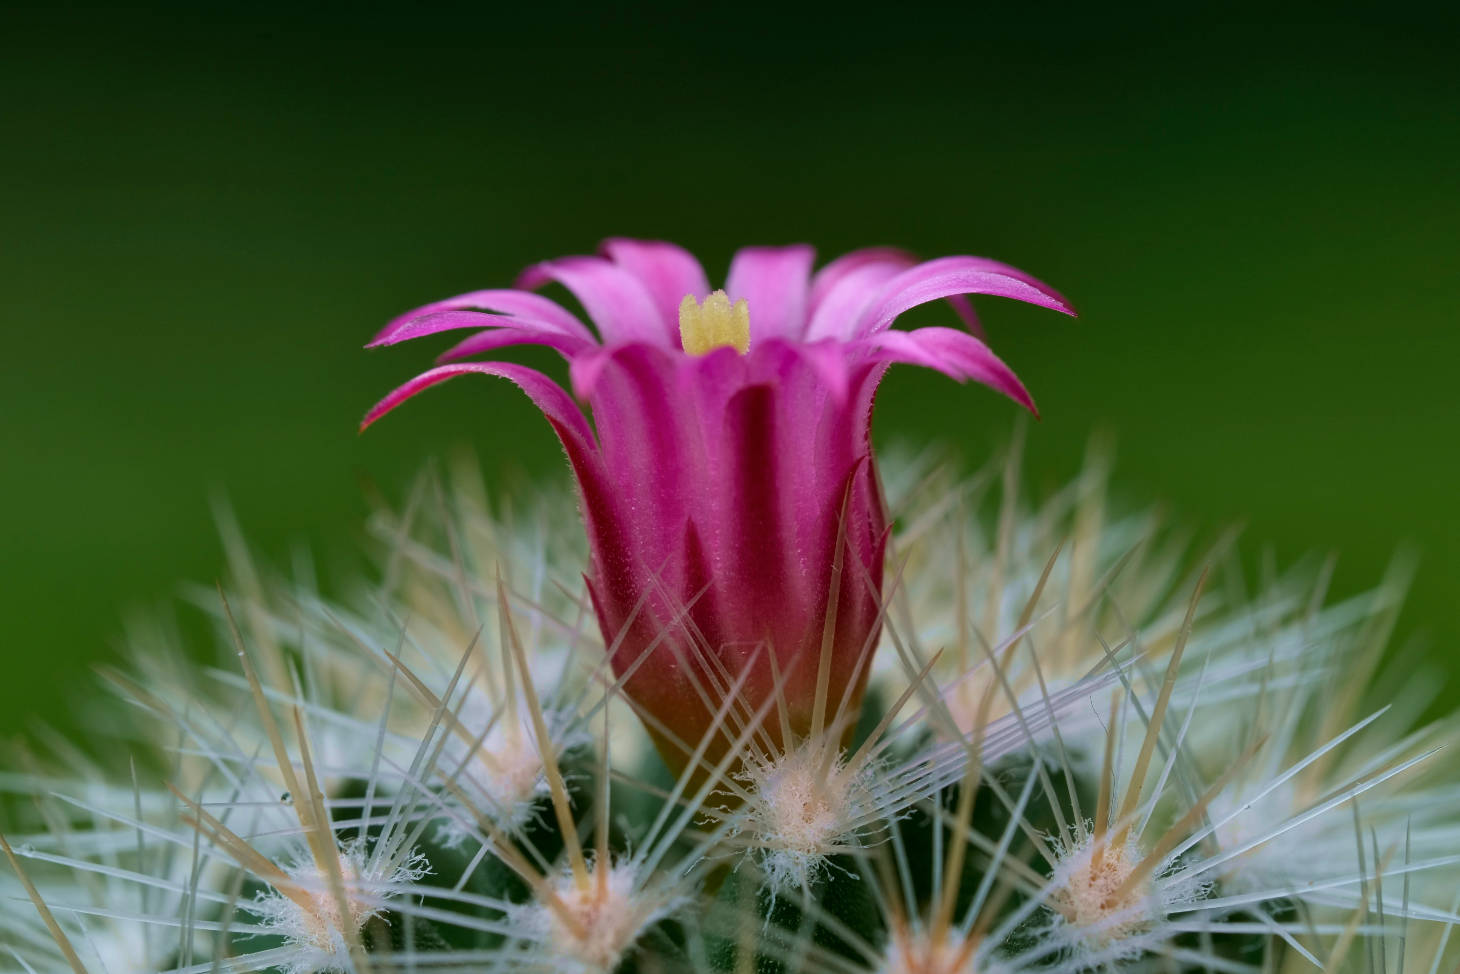 zoomed in mammillaria flower